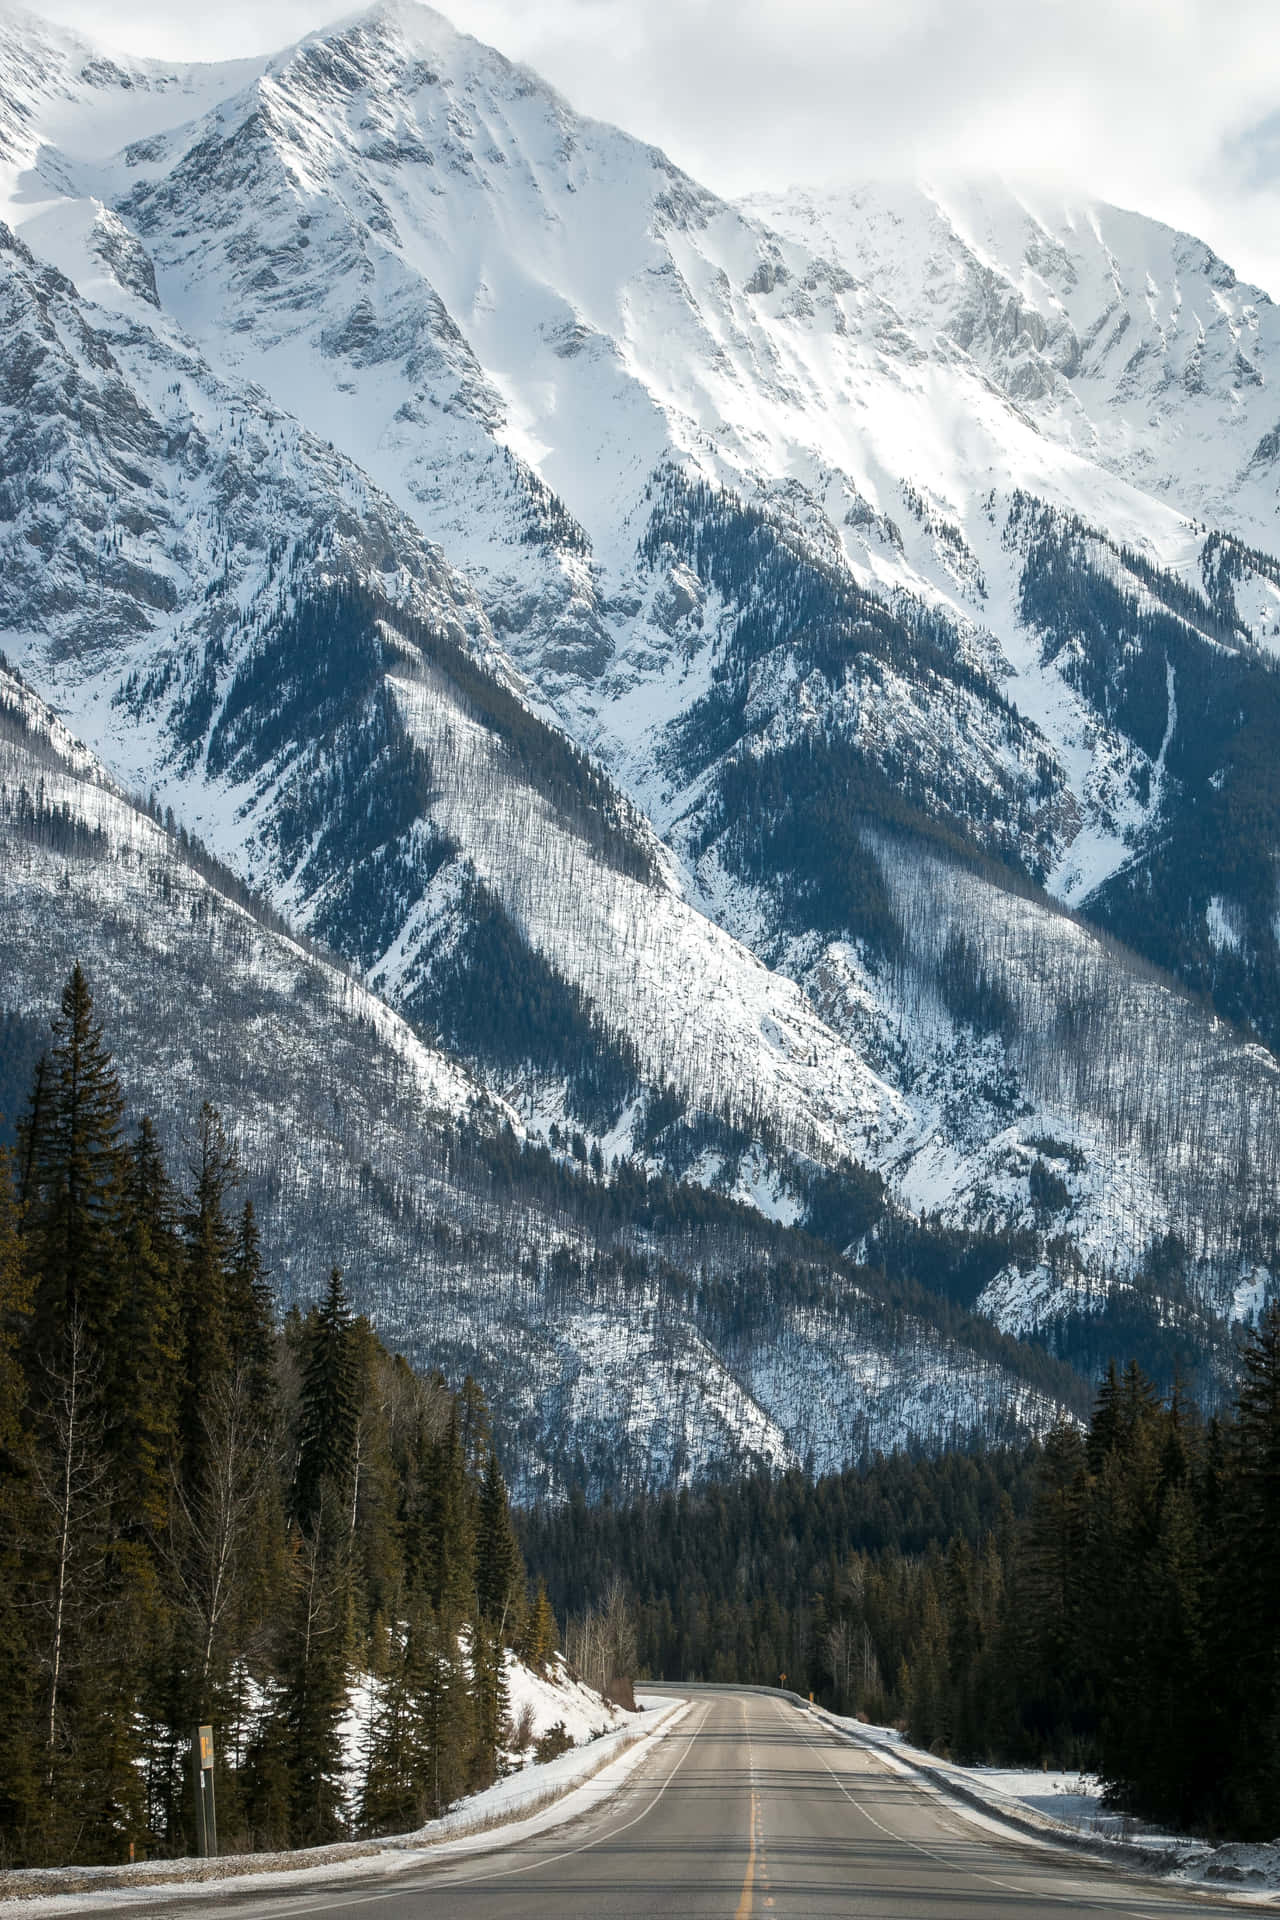 Capture the Magnificence of the Snowy Mountains